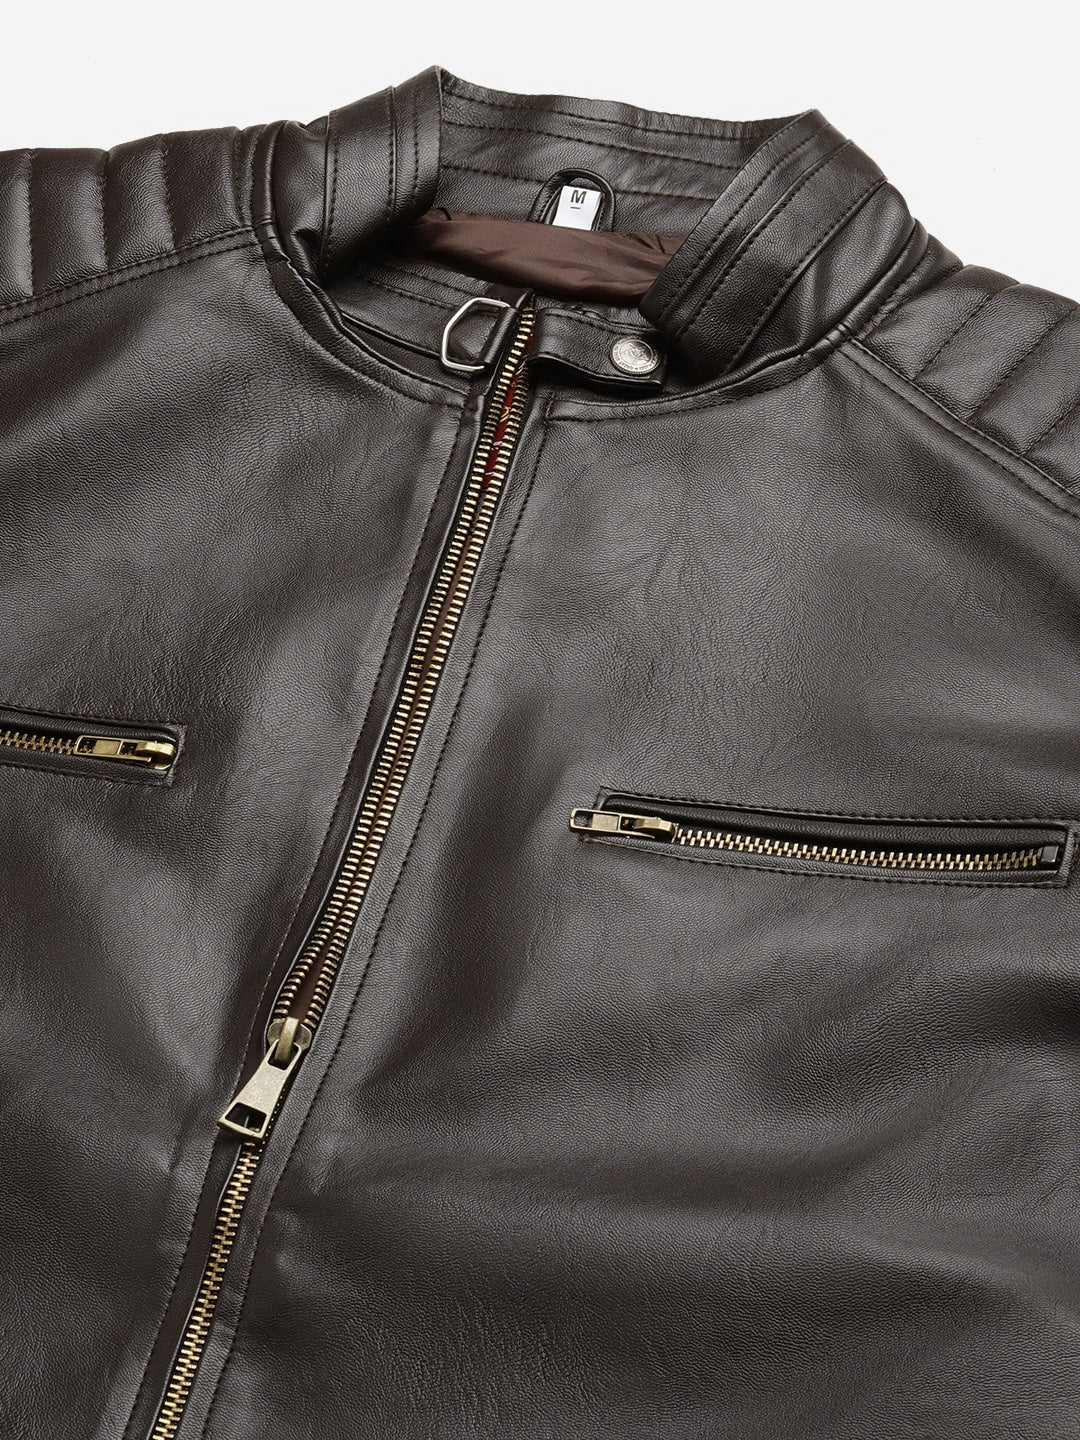 Men Coffee Brown Solid Leather Jacket | QAWACH